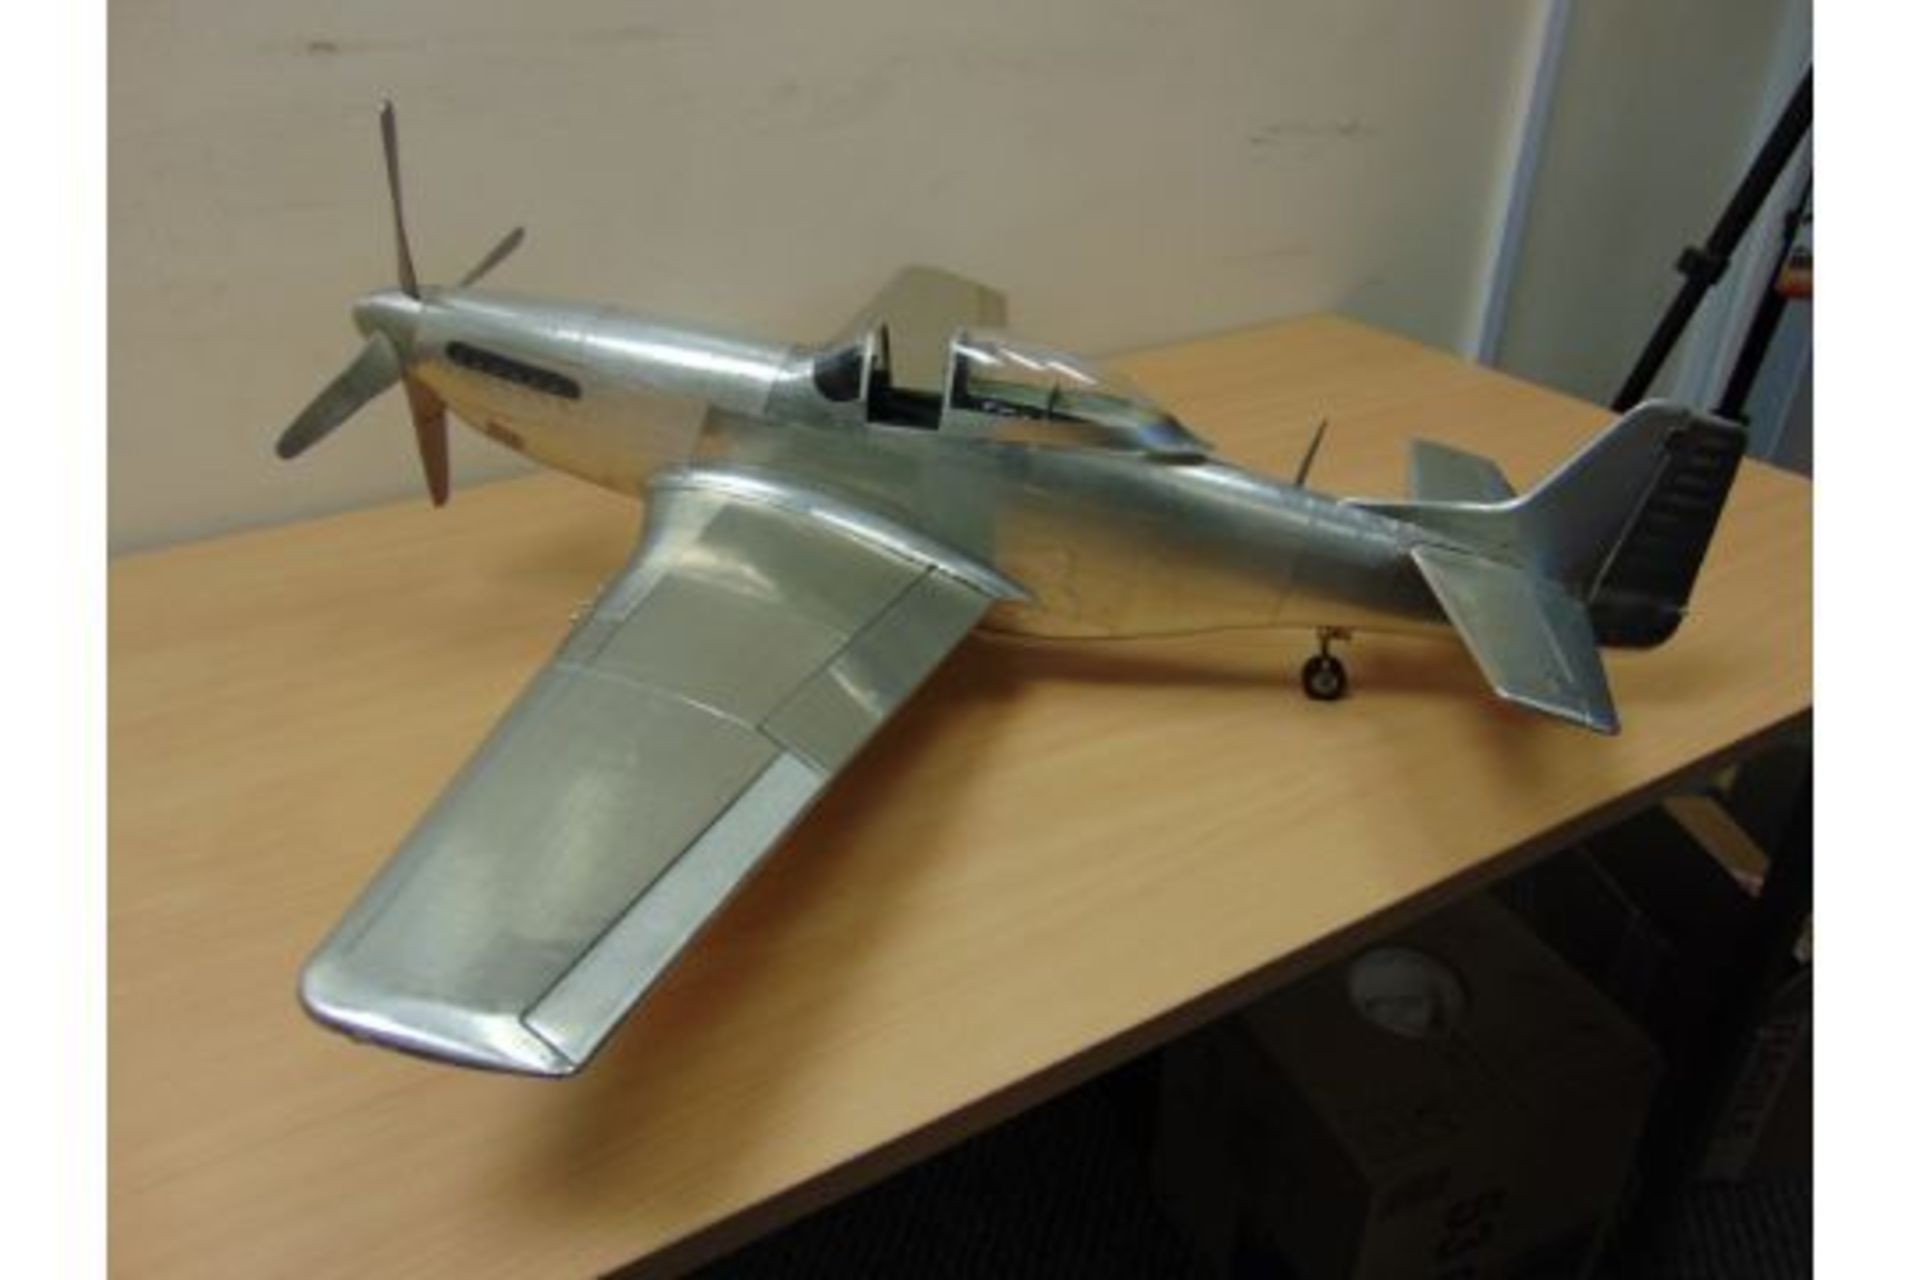 SUPERB Detailed Scale MODEL OF WW 2 P51 MUSTANG in Polished Aluminium with Retactable Undercariage.